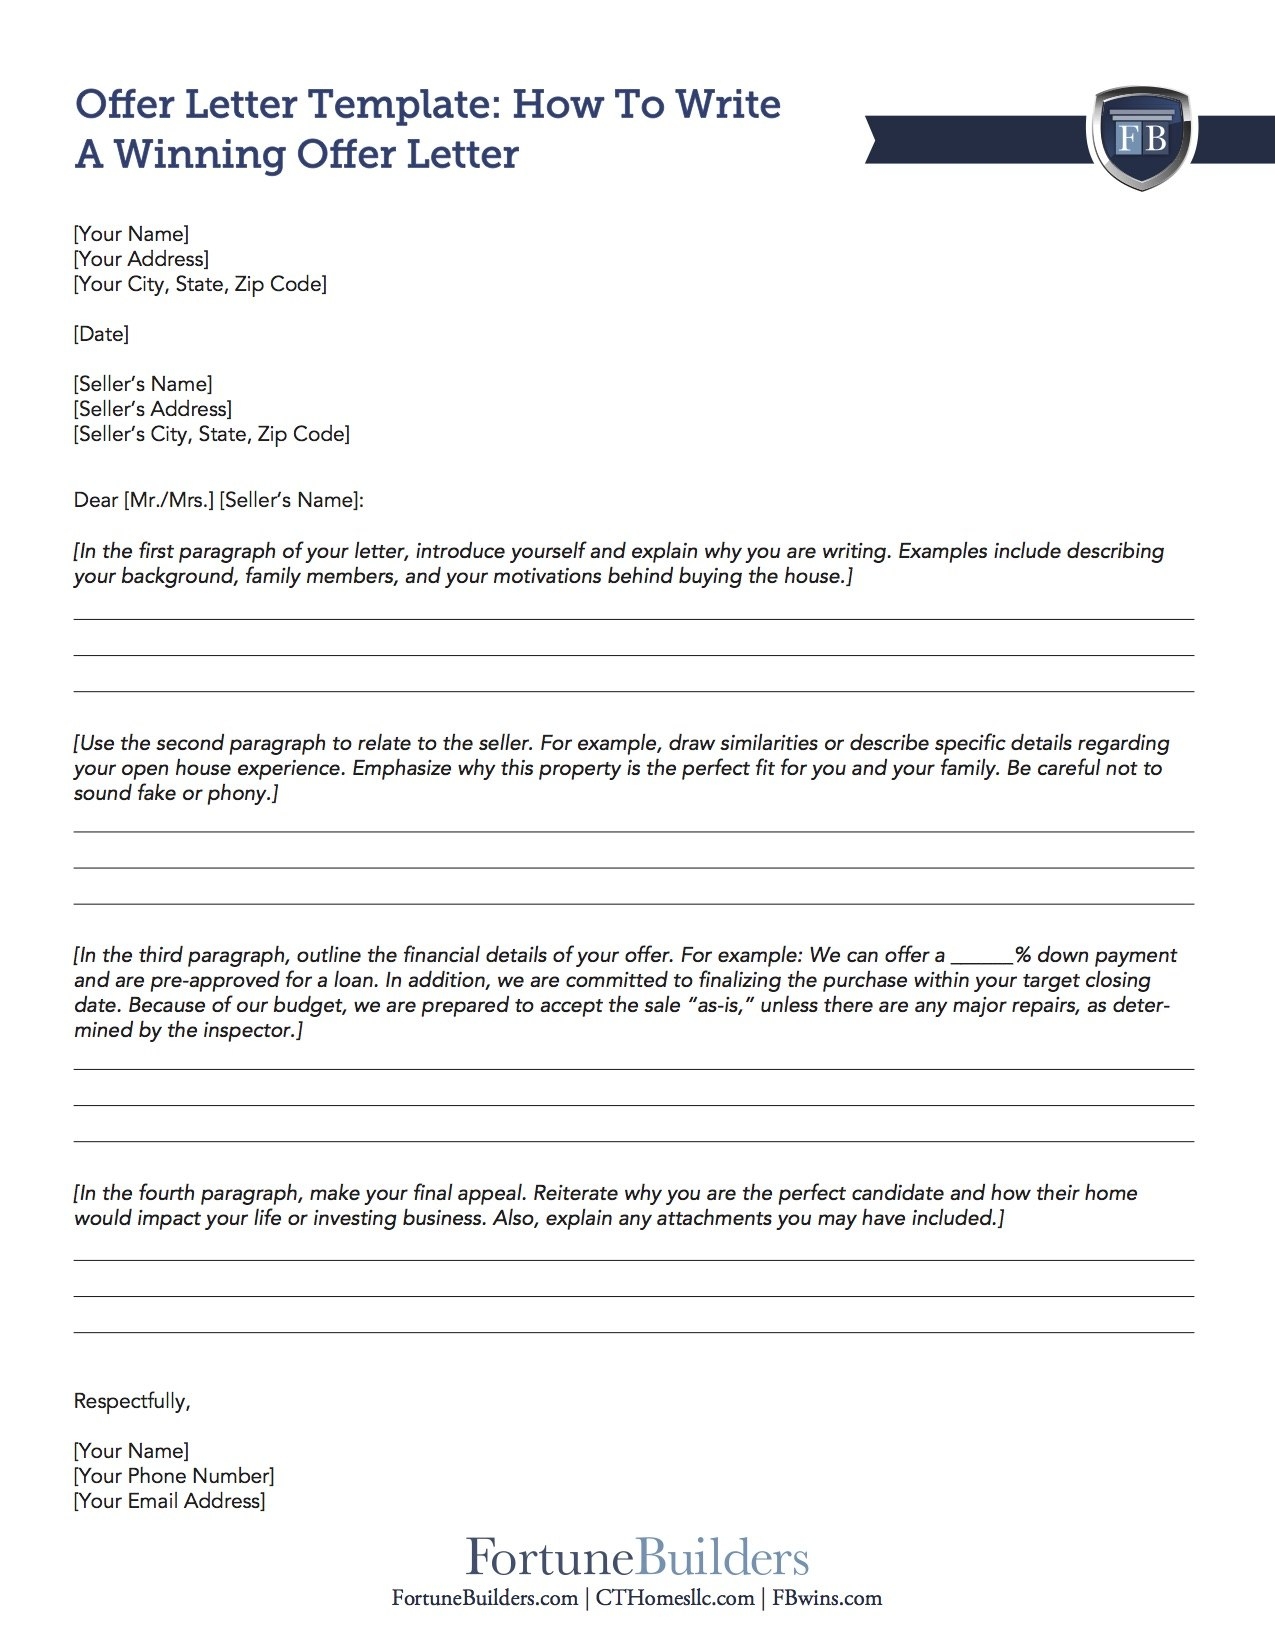 Free Real Estate Offer Letter Template  Fortunebuilders throughout House Offer Letter Template